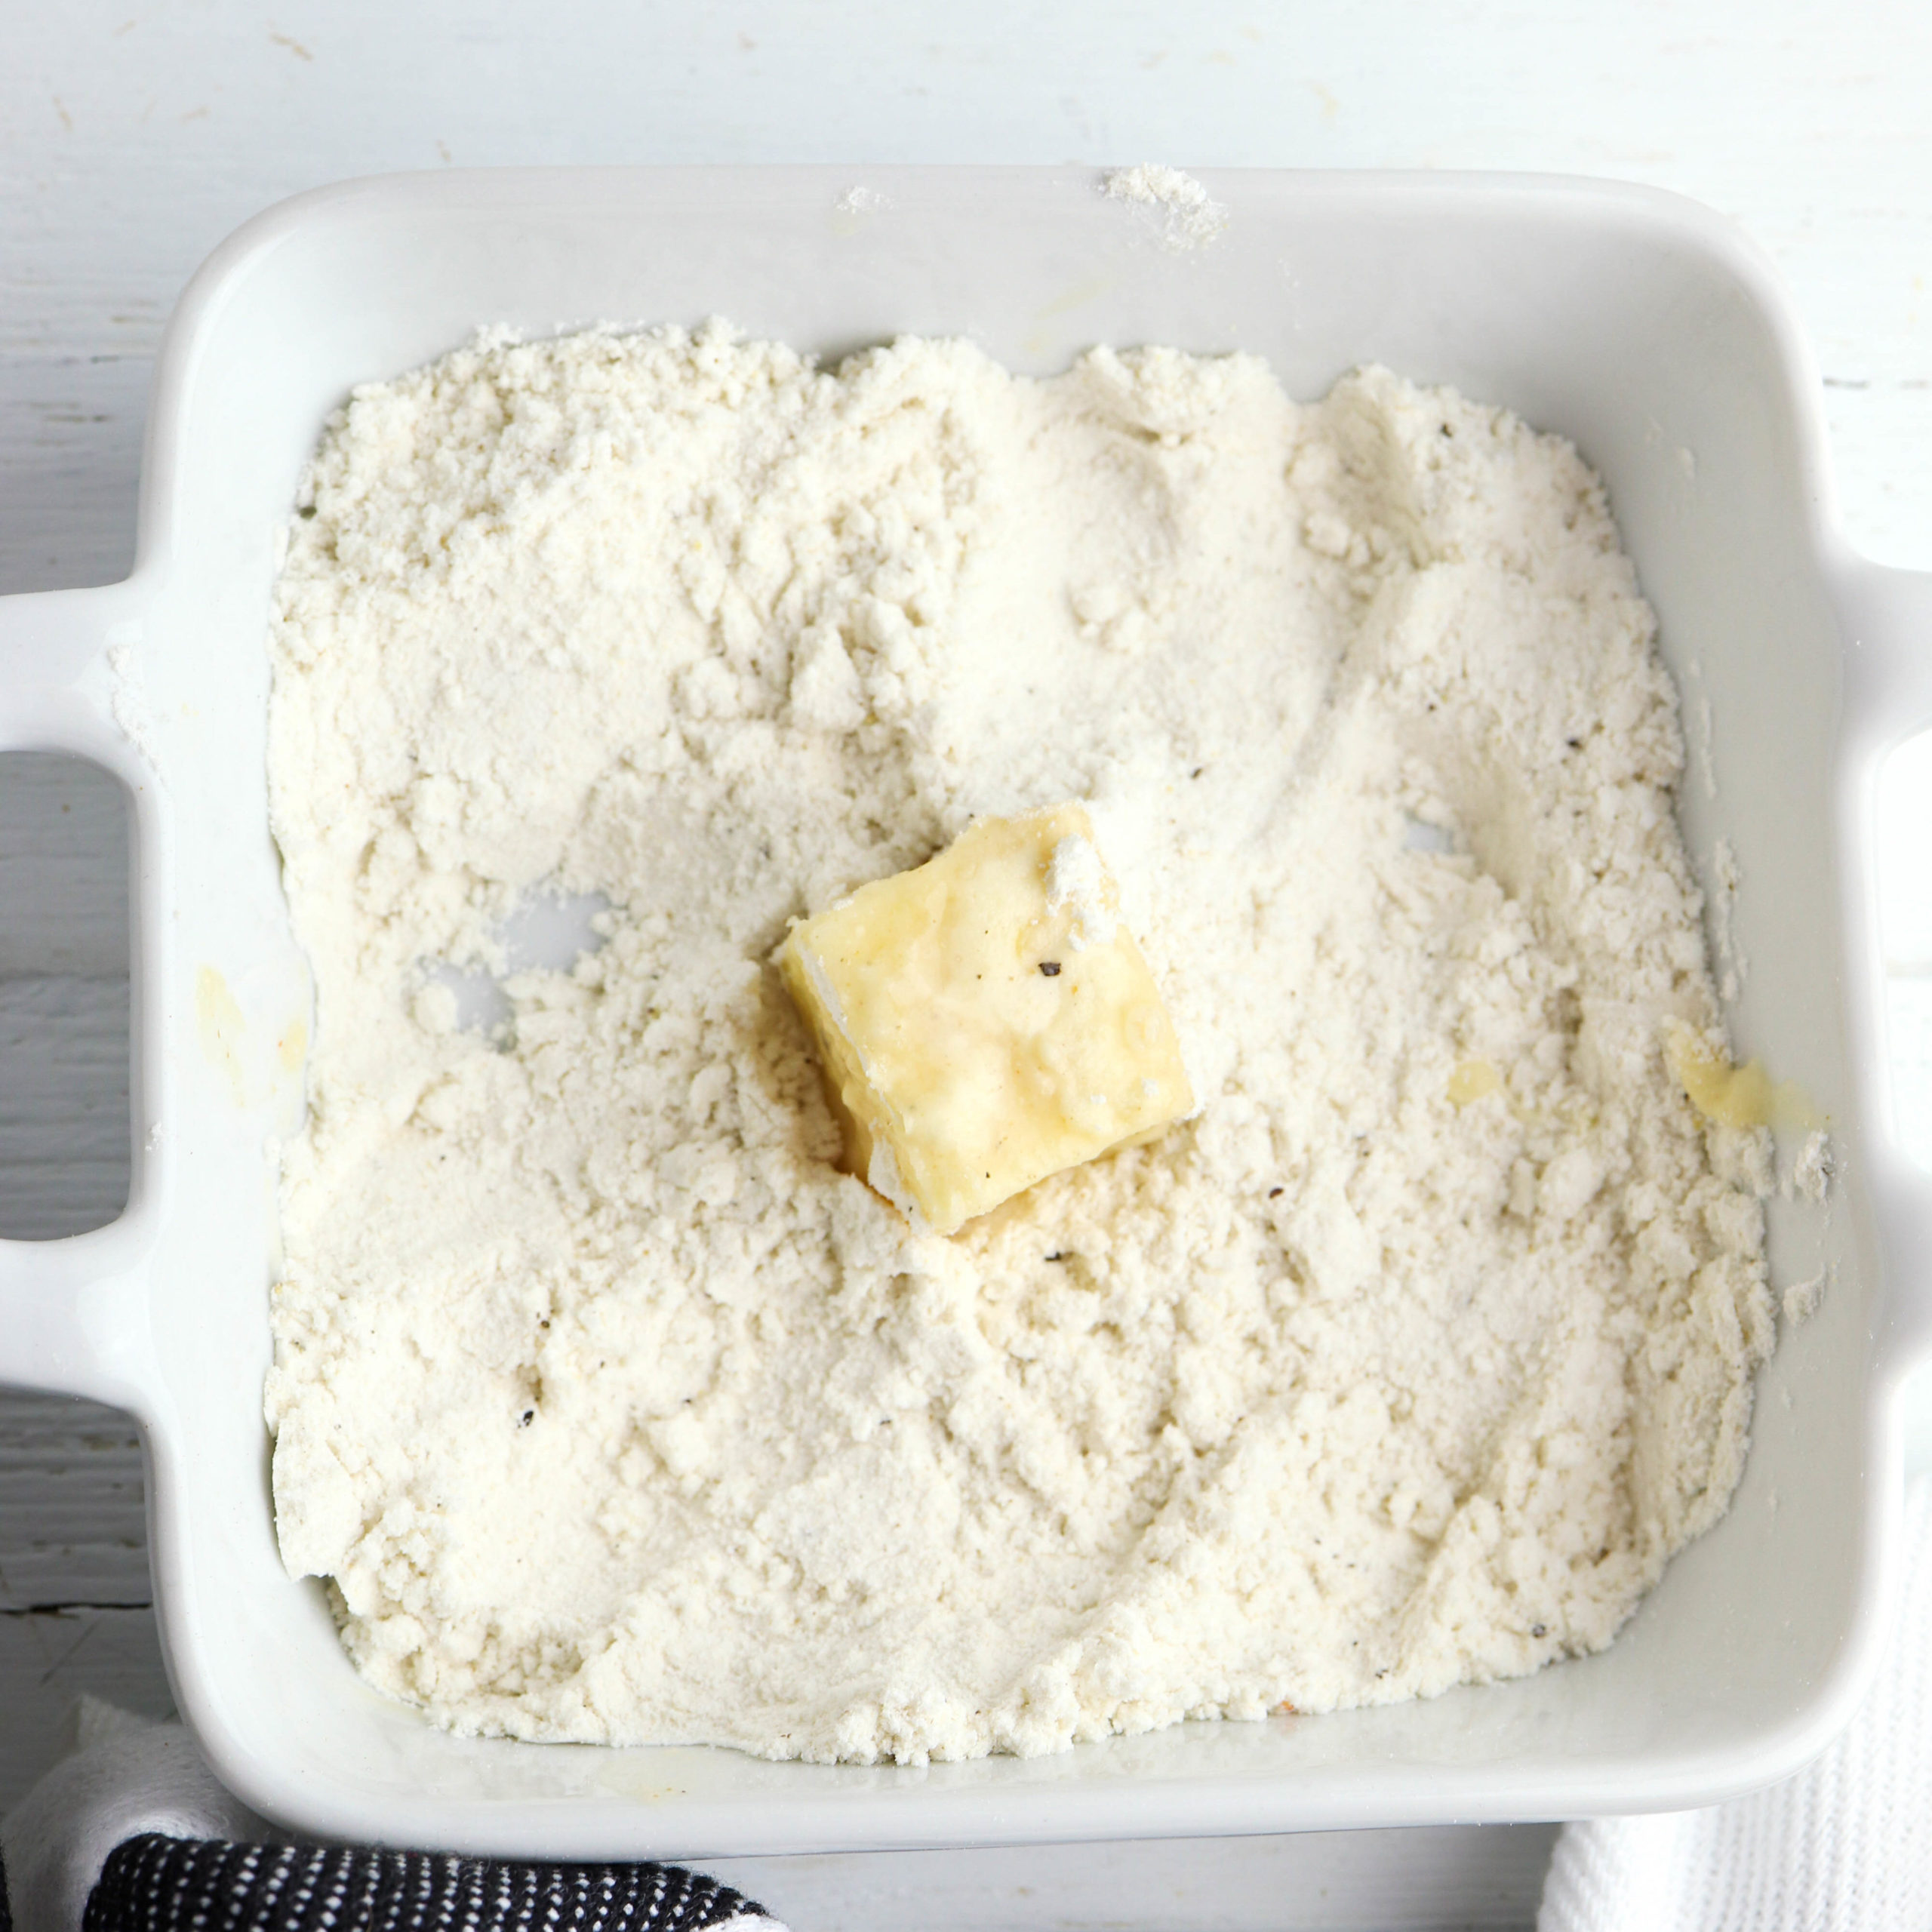 dipping the cheese in flour